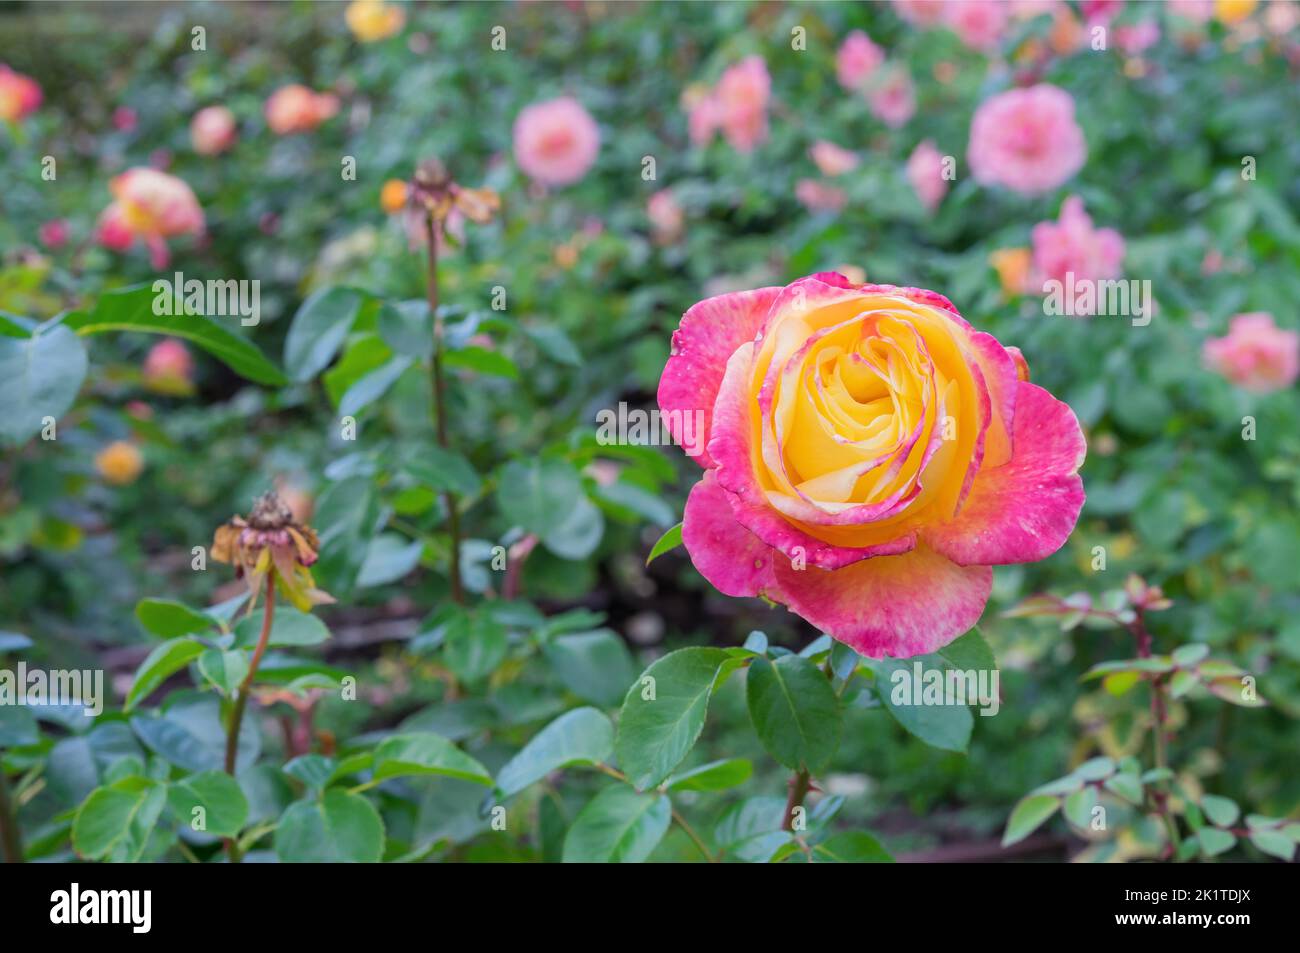 Bicolor dark pink rose with yellow middle in the summer garden. Stock Photo